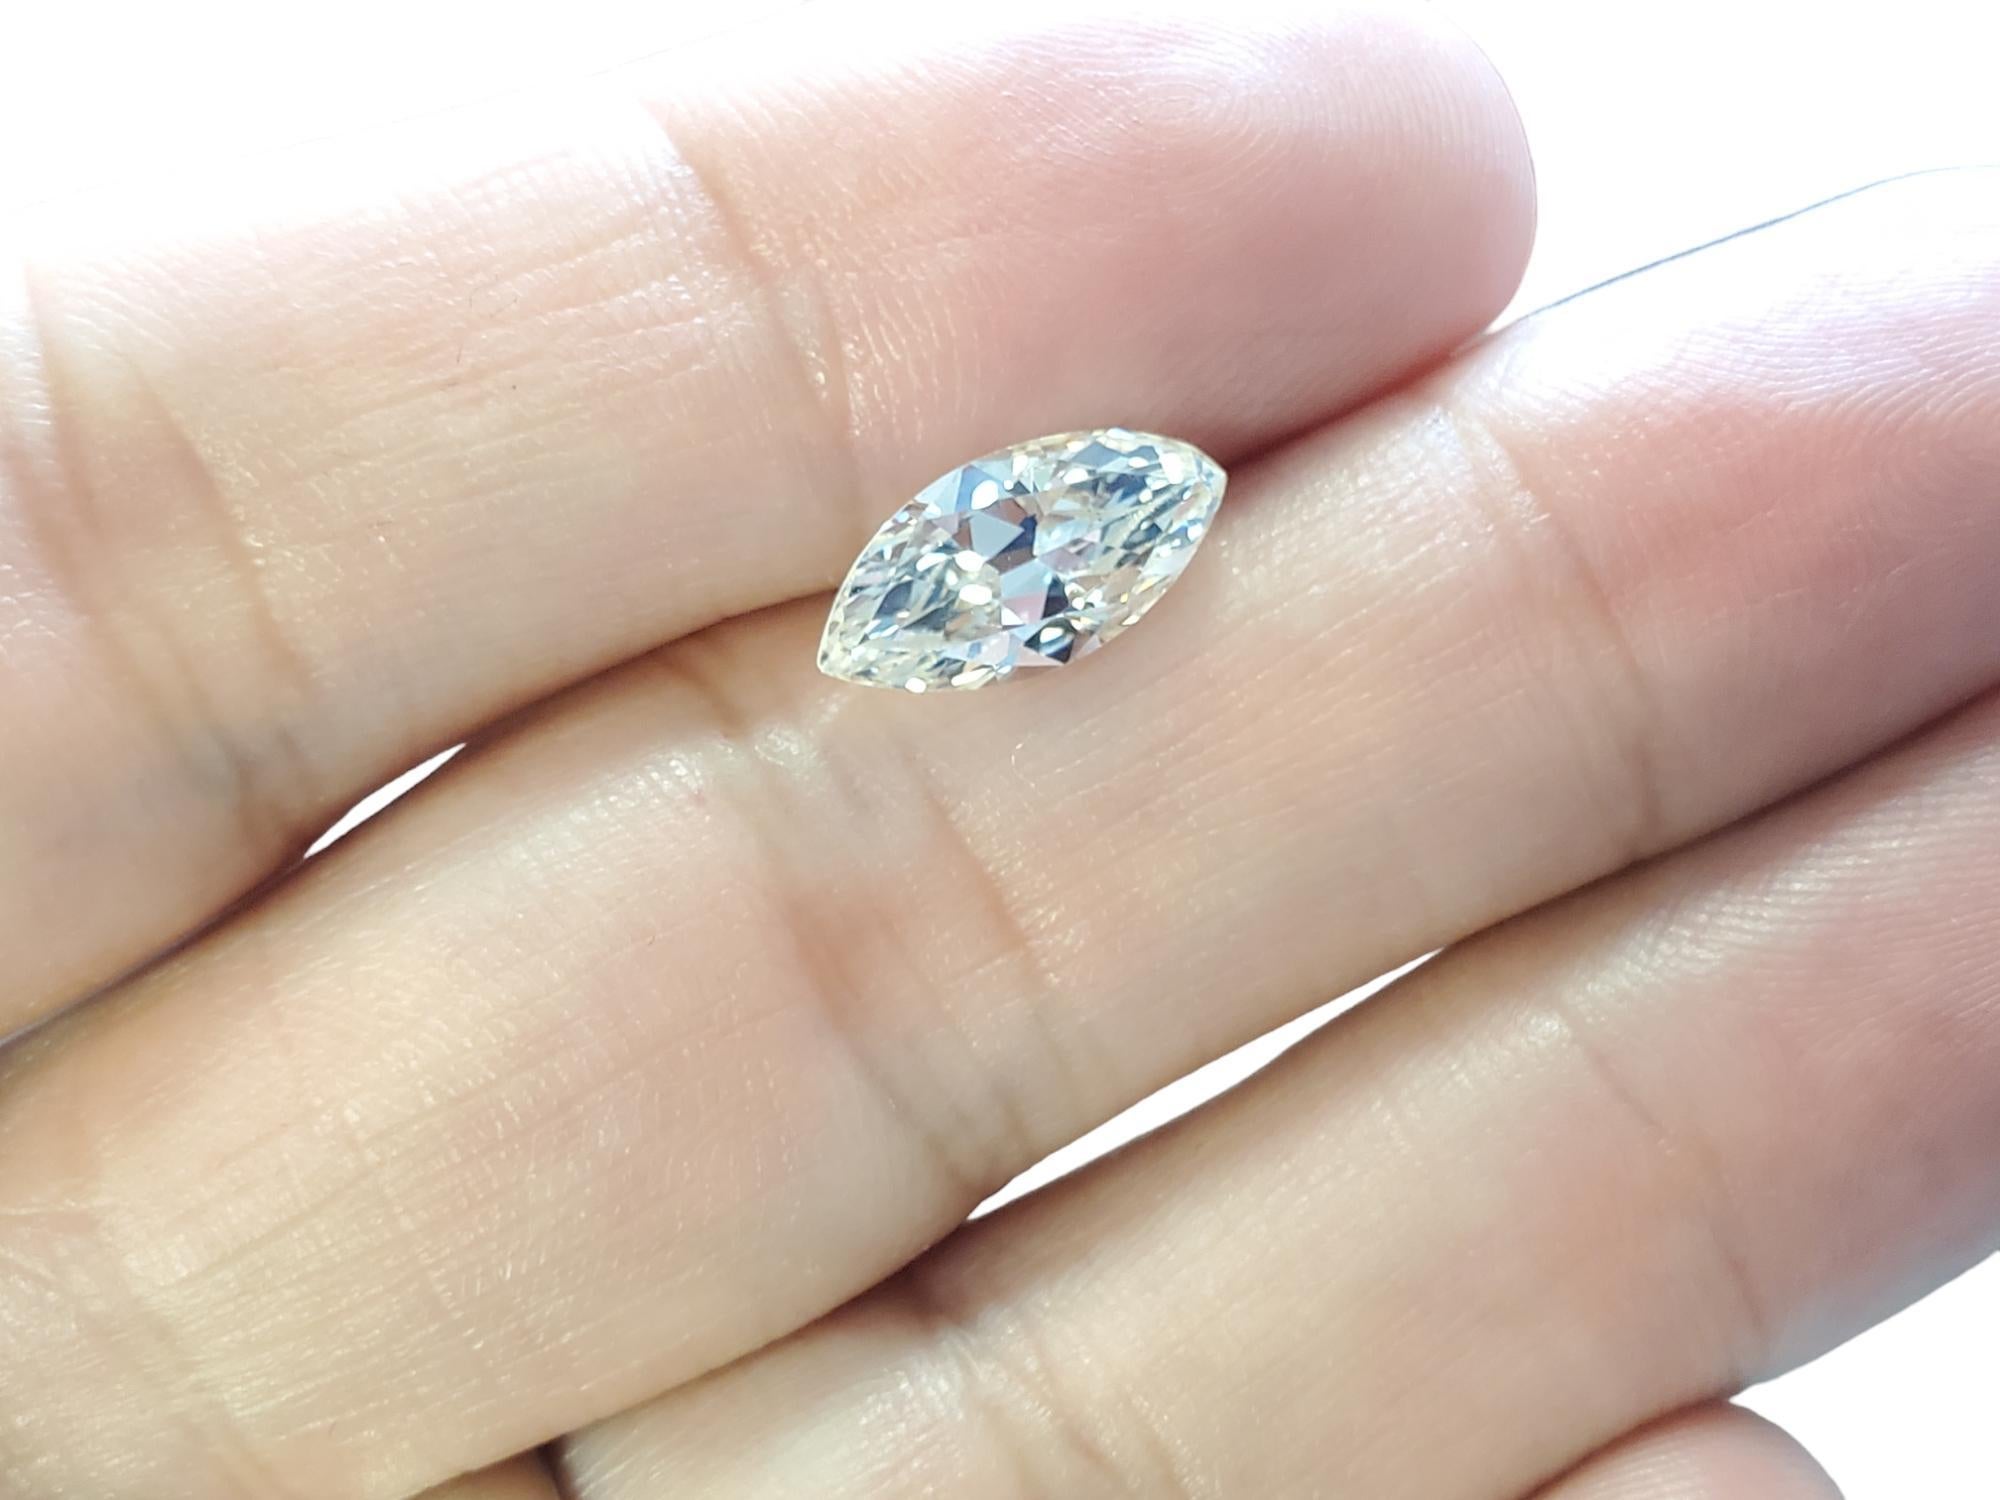 Listed is a very tough to find antique marquise cut natural diamond. This is a true old stone, bruted girdle (not polished...showing its age), open culet and older faceting. The diamond weighs 2.19(9)ct, it could go 2.19 or 2.20 depending on the